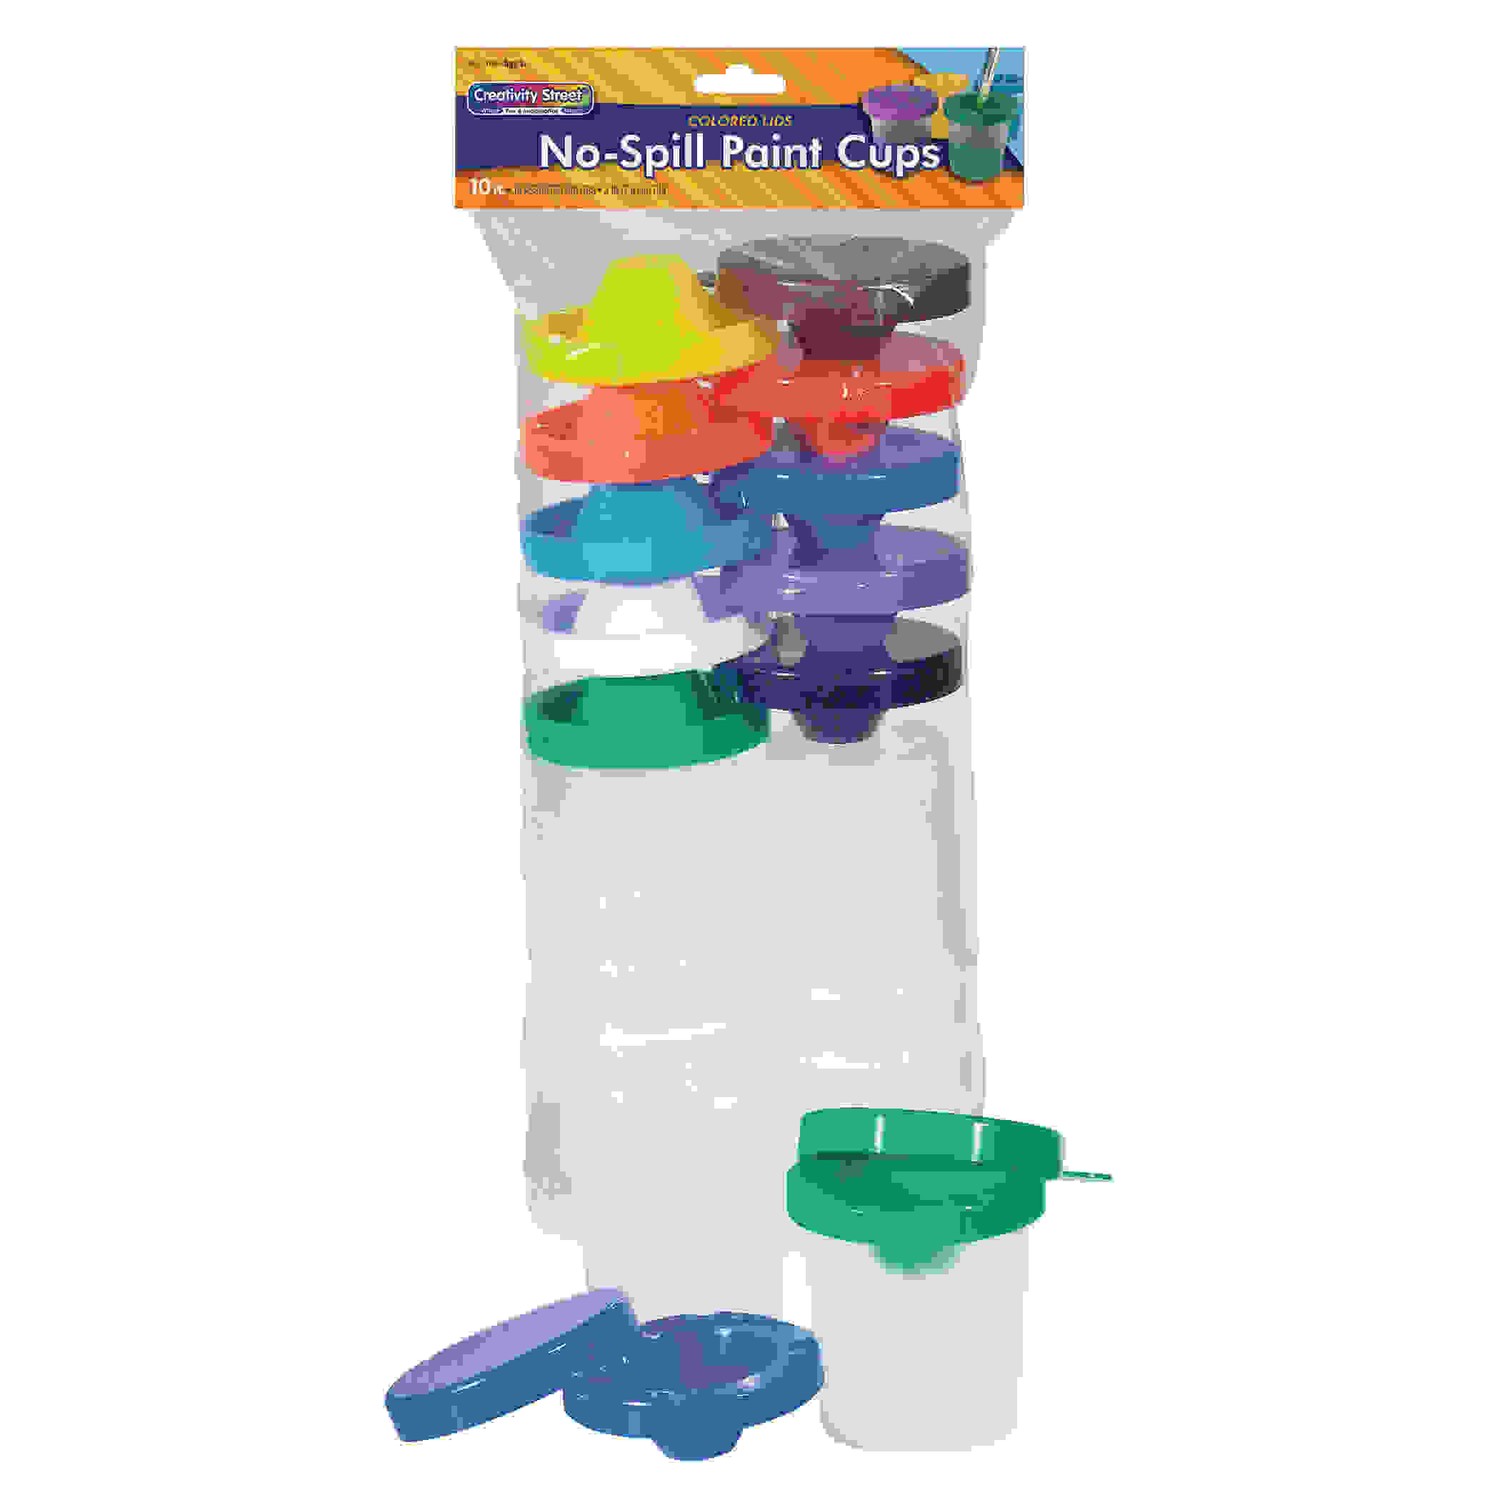 No-Spill Round Paint Cups with Colored Lids, 3" Diameter, 10 Cups